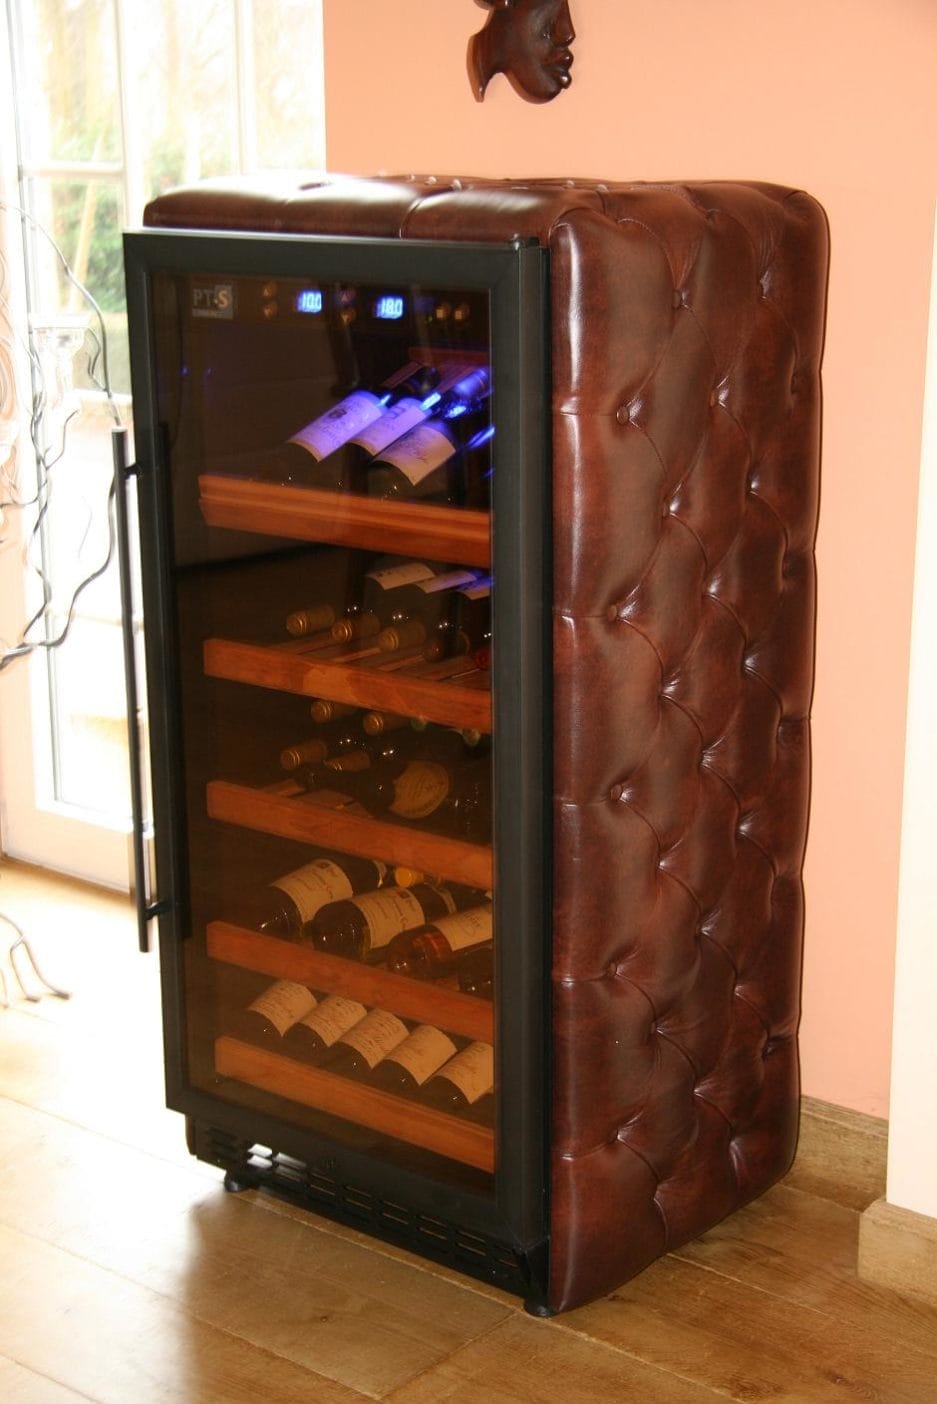 A Leather wrapped in brown leather with a quilted pattern, with an open glass door showing several shelves filled with wine bottles.